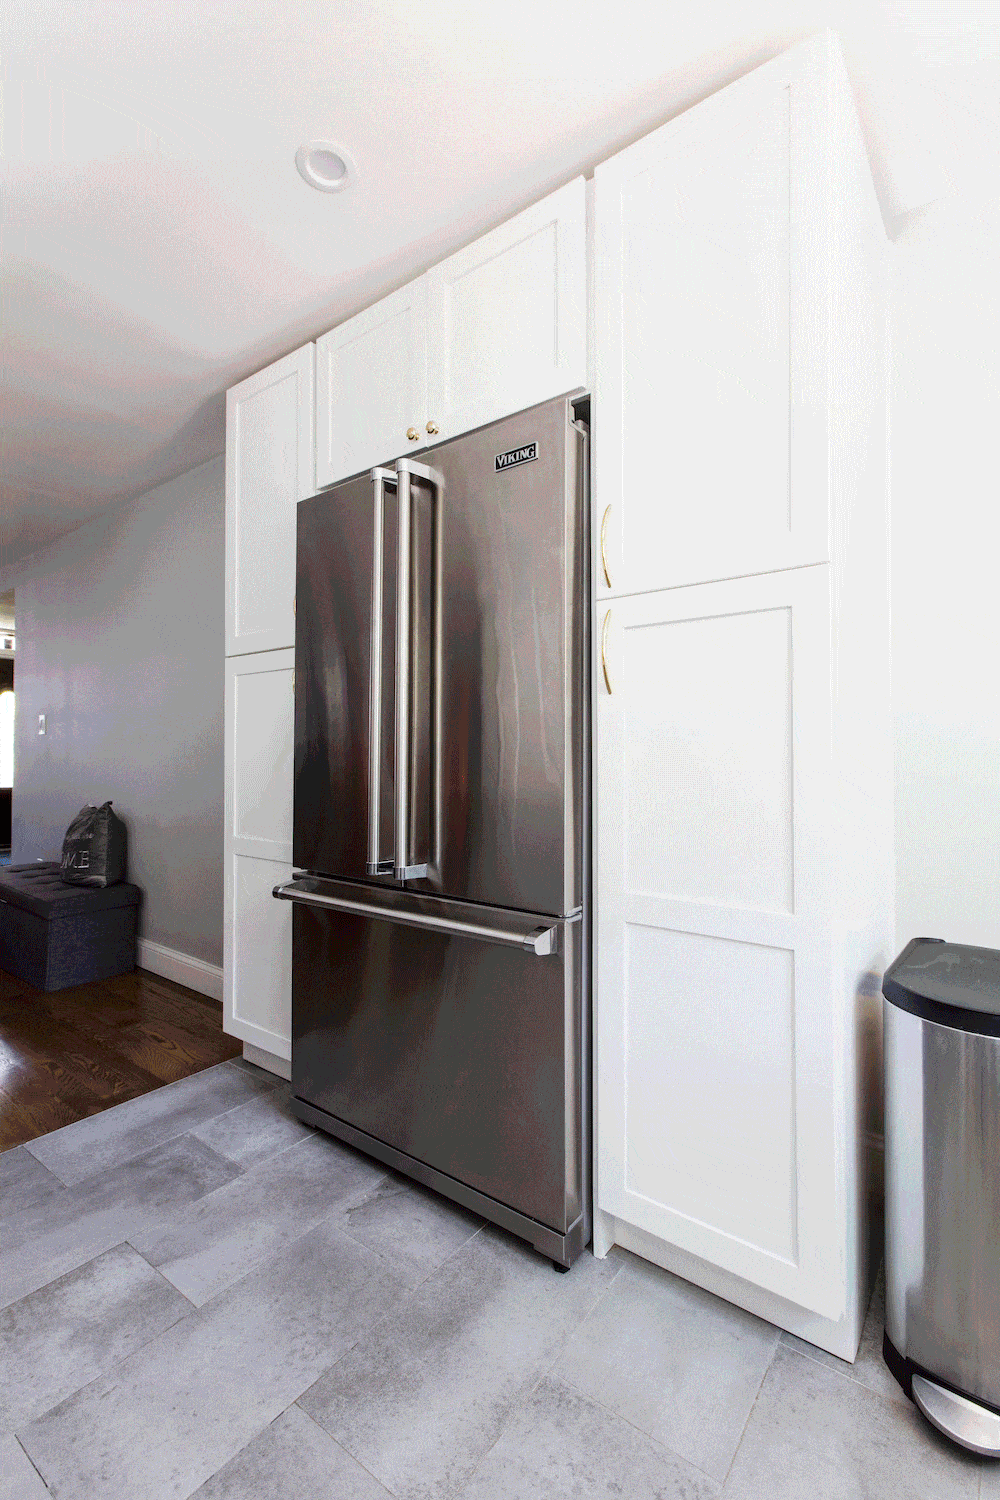 Animation of kitchen pantry opening with slide-out drawers